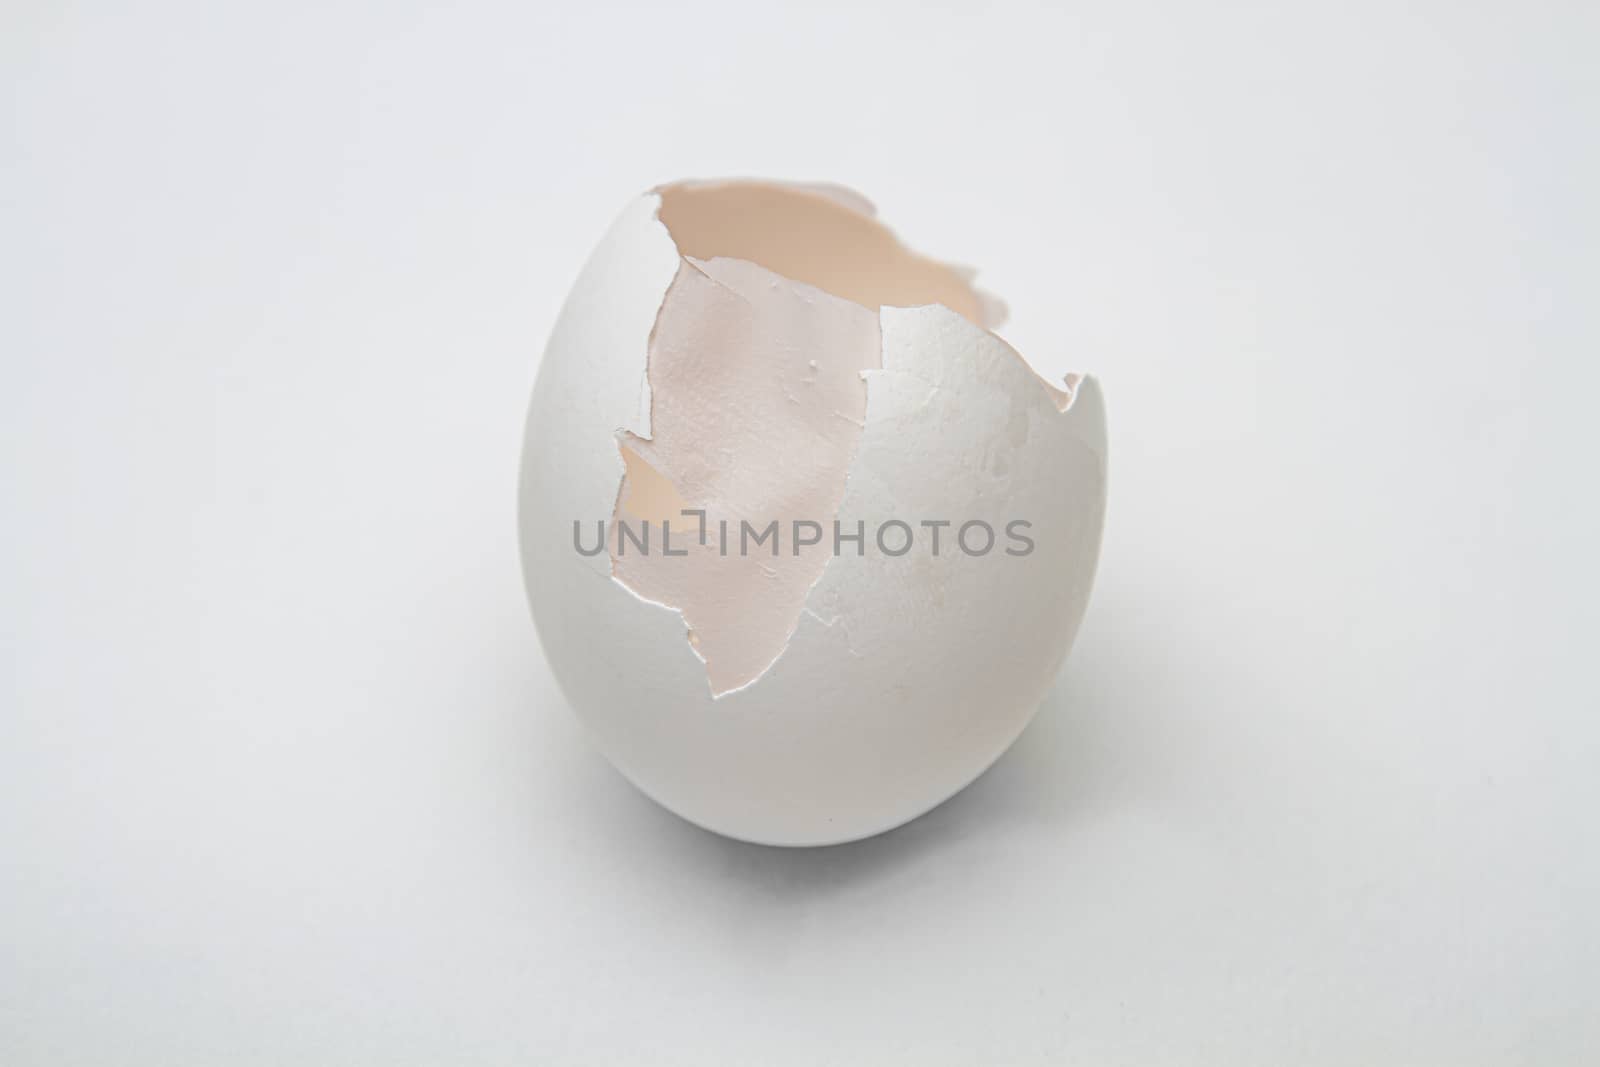 cracked egg with part of the shell brolen showing the inner skin